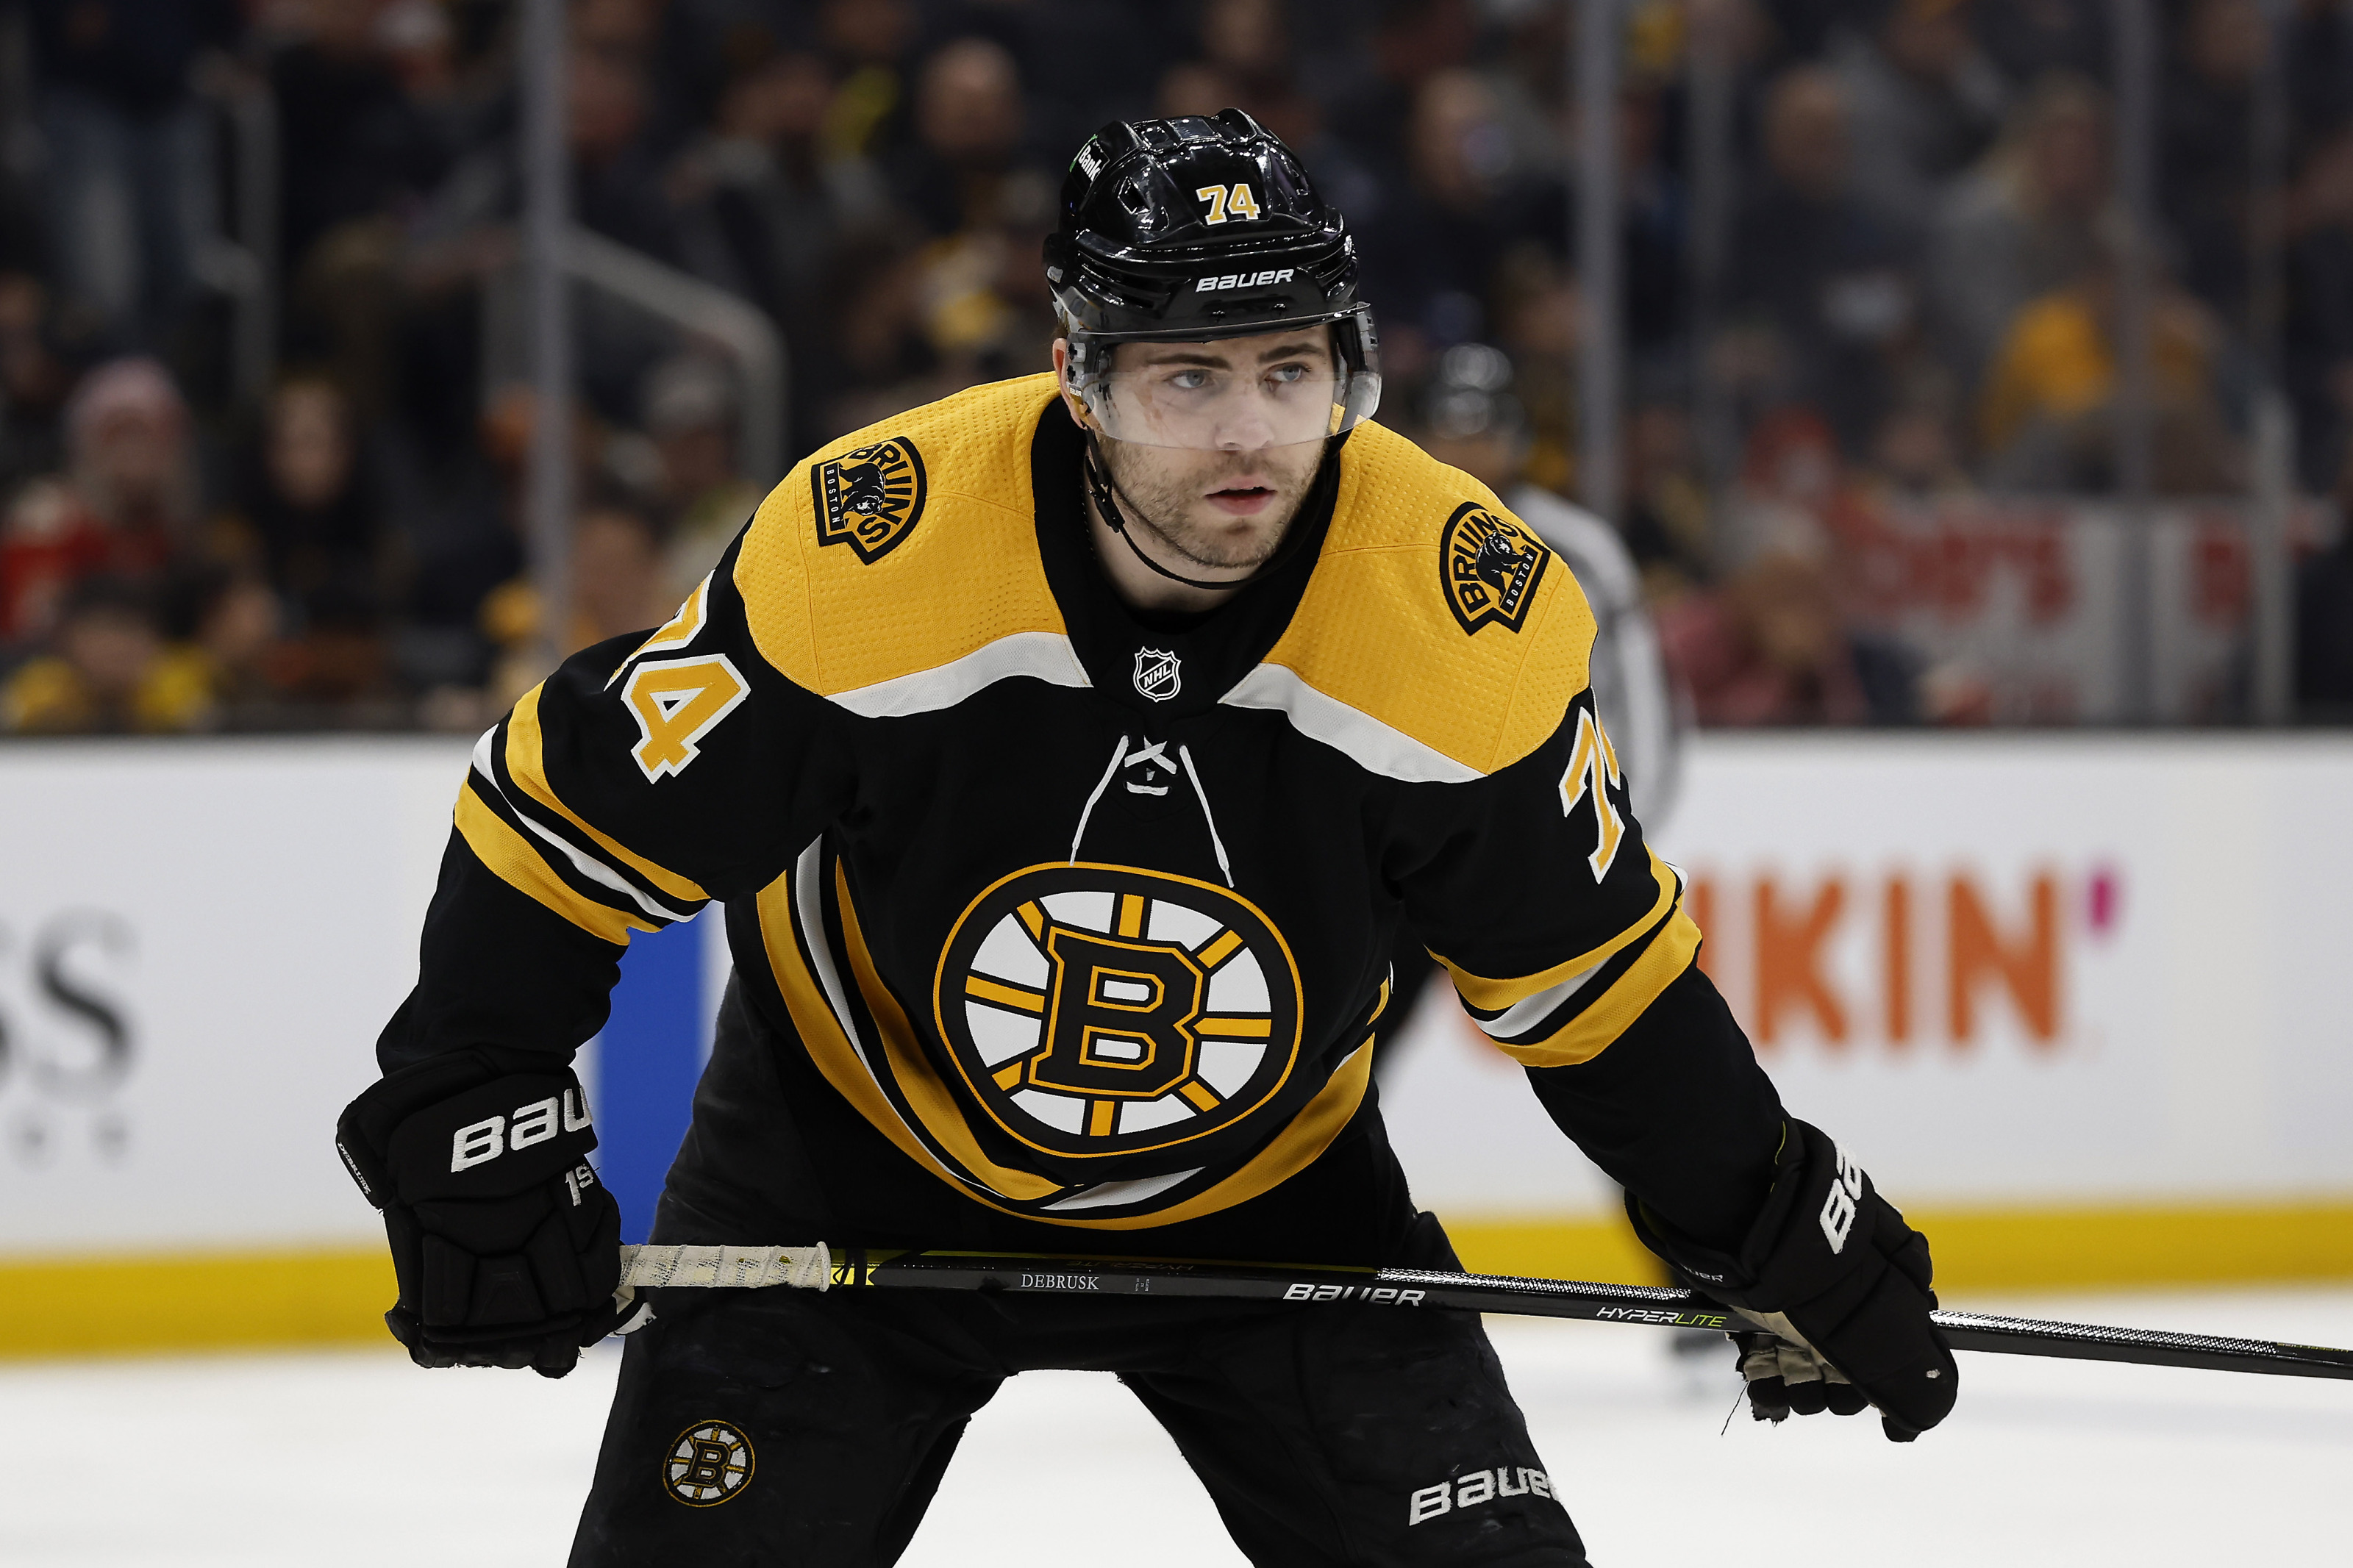 Top 5 Trade Destinations for Jake DeBrusk - The Hockey News